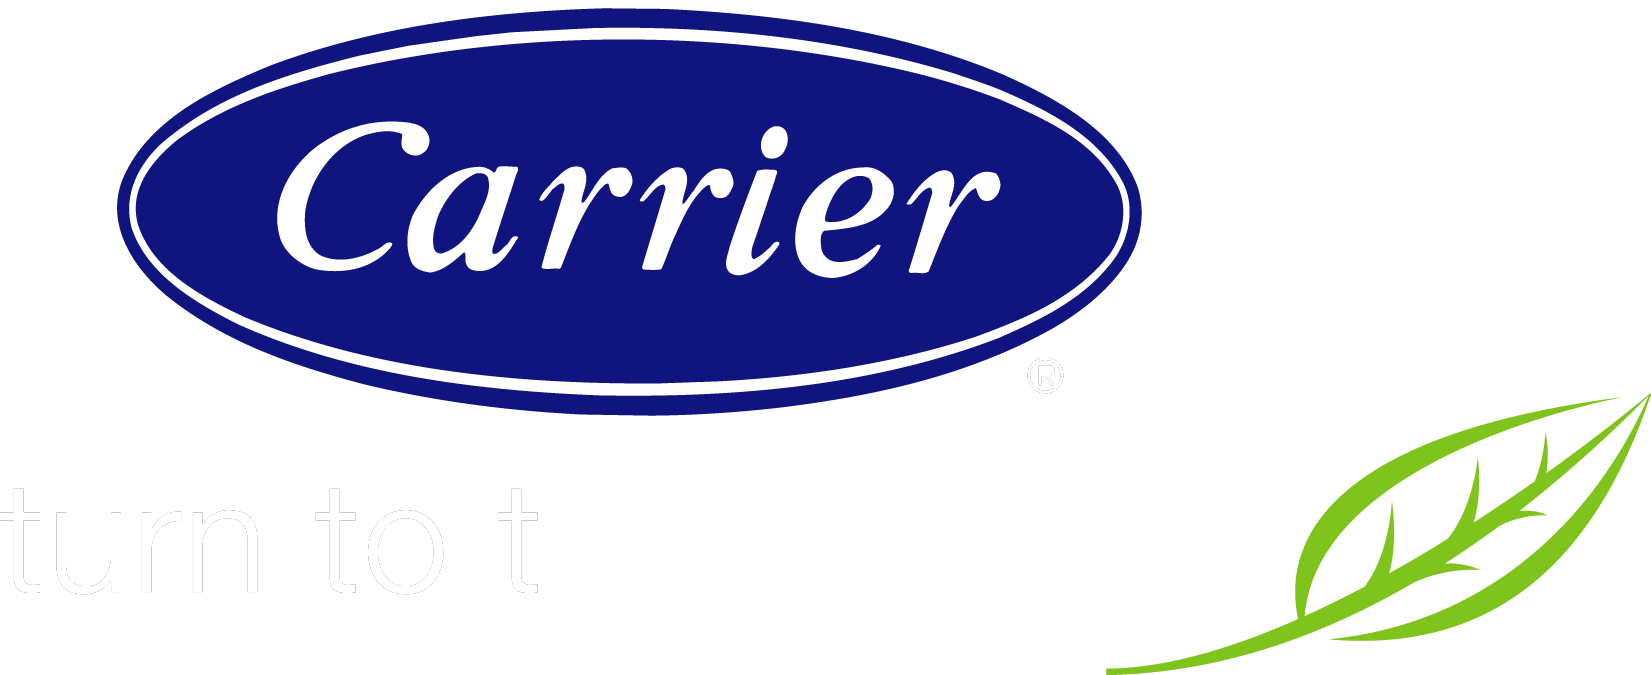 Built On Willis Carrier's Invention Of Modern Air Conditioning - Carrier Air Conditioning (1651x675)